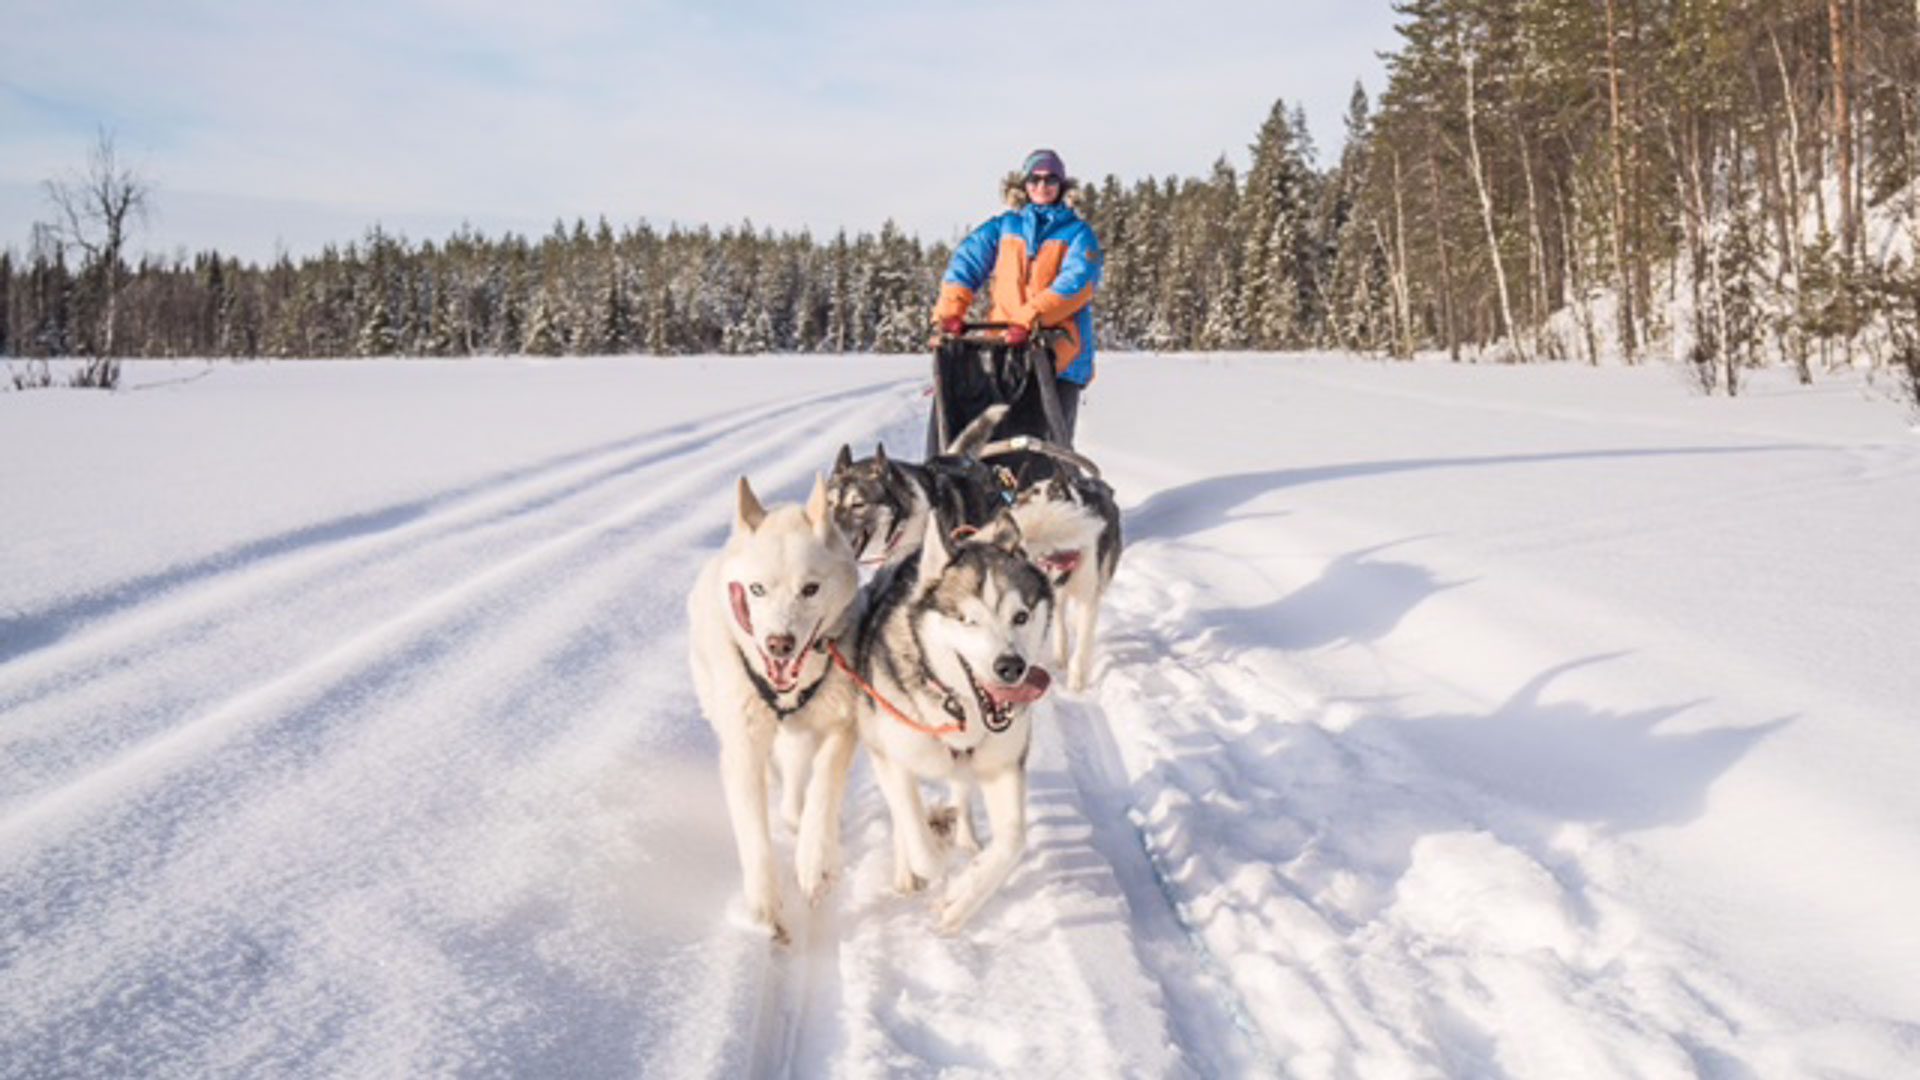 White husky with one brown eye and one icy blue eye. Arctic Husky Safari for Adults only, Rovaniemi, Wild Nordic Finland @wildnordicfinland